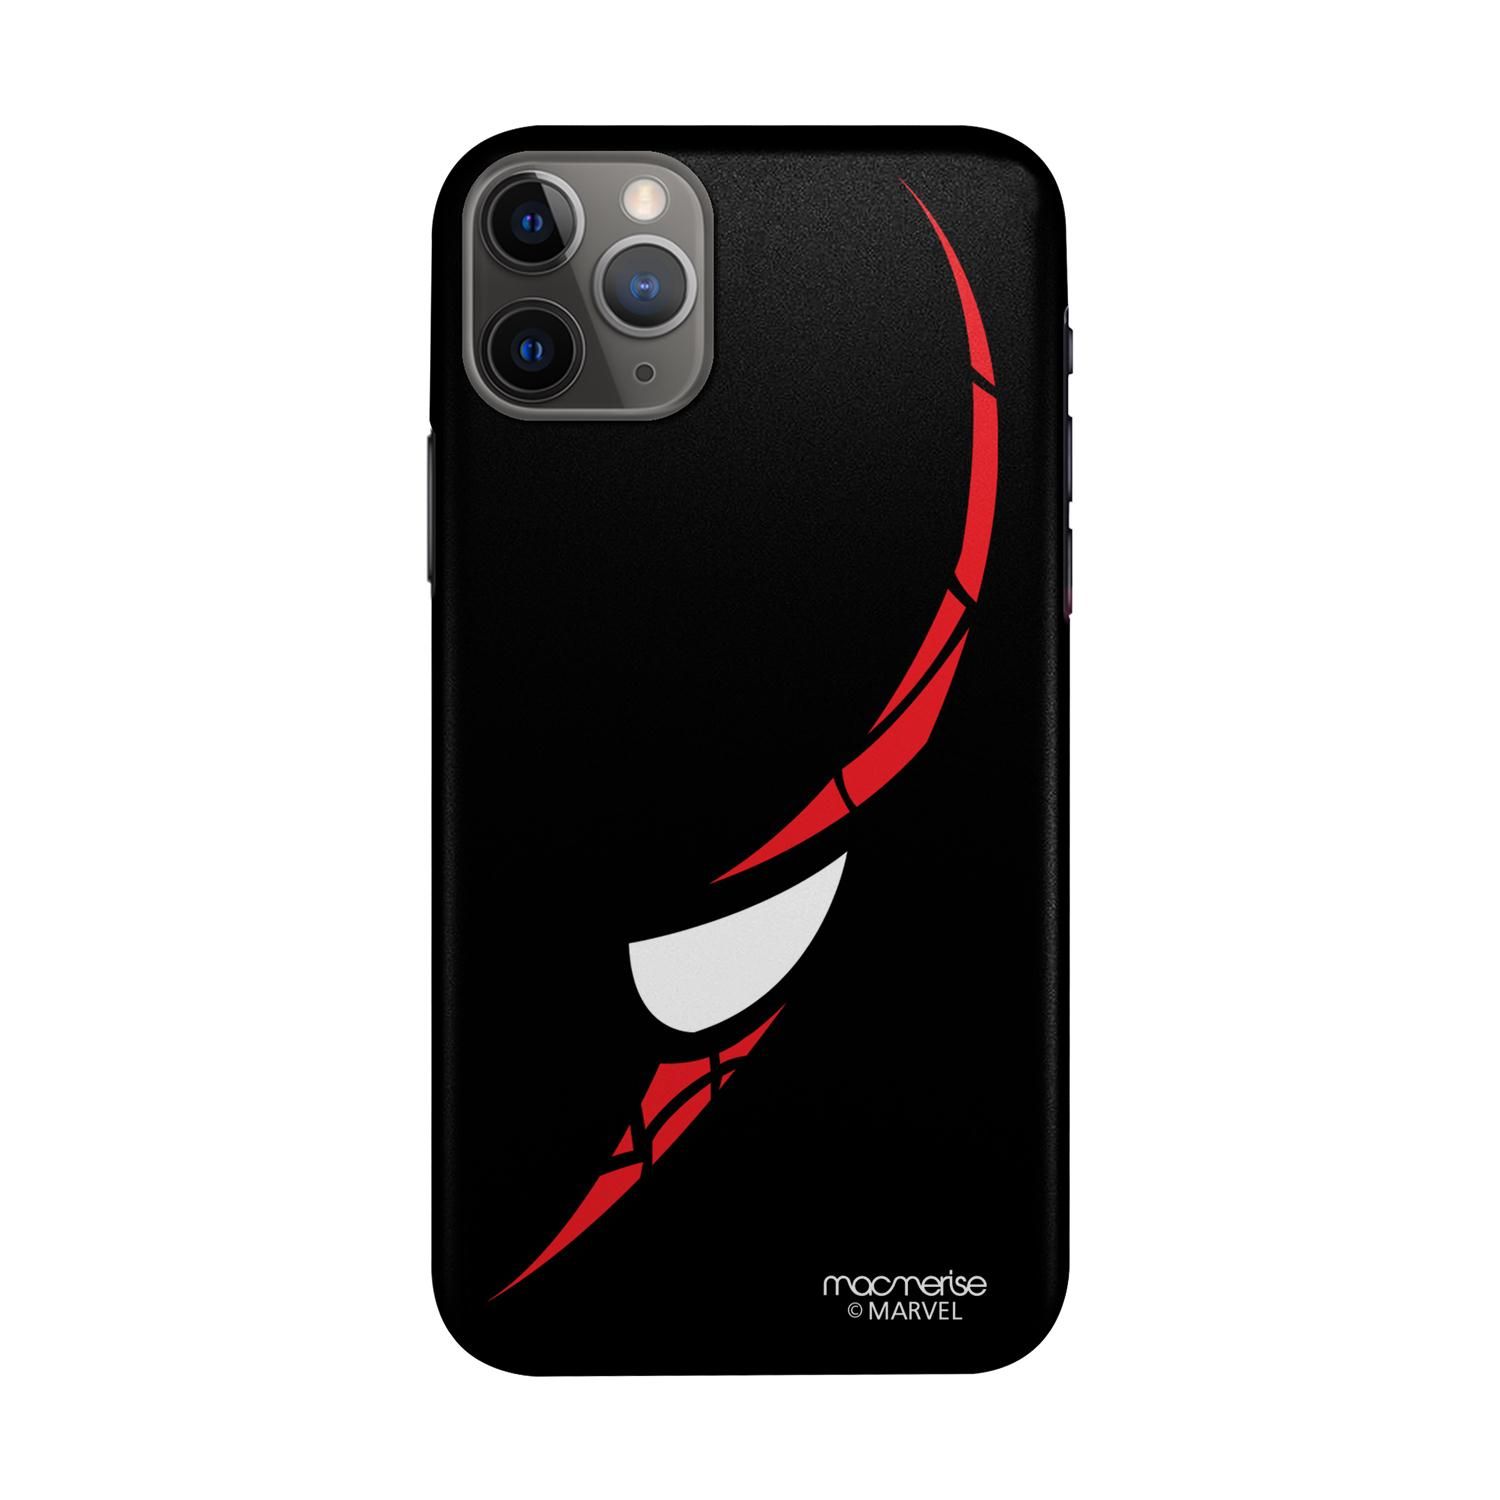 Buy The Amazing Spiderman - Sleek Phone Case for iPhone 11 Pro Max Online